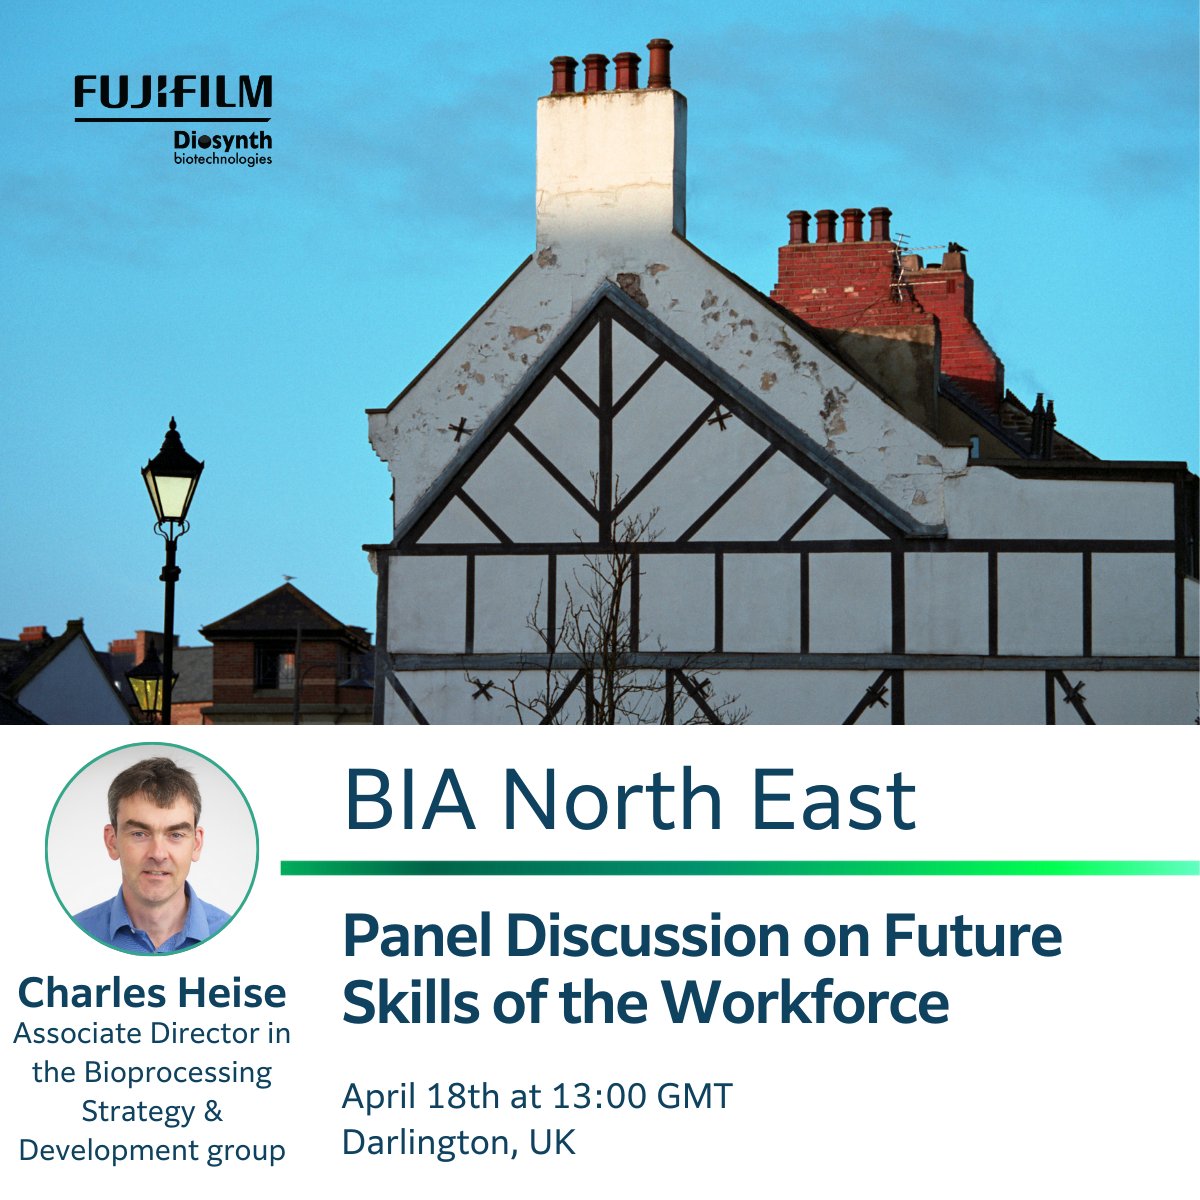 We're proud to announce that Charles Heise, Associate Director in our Bioprocessing Strategy & Development group, will be participating in a scientific panel on 'Skills for the Future Workforce' at the BIA North East event! #BIANorthEast #Biopharma #CDMOExperience